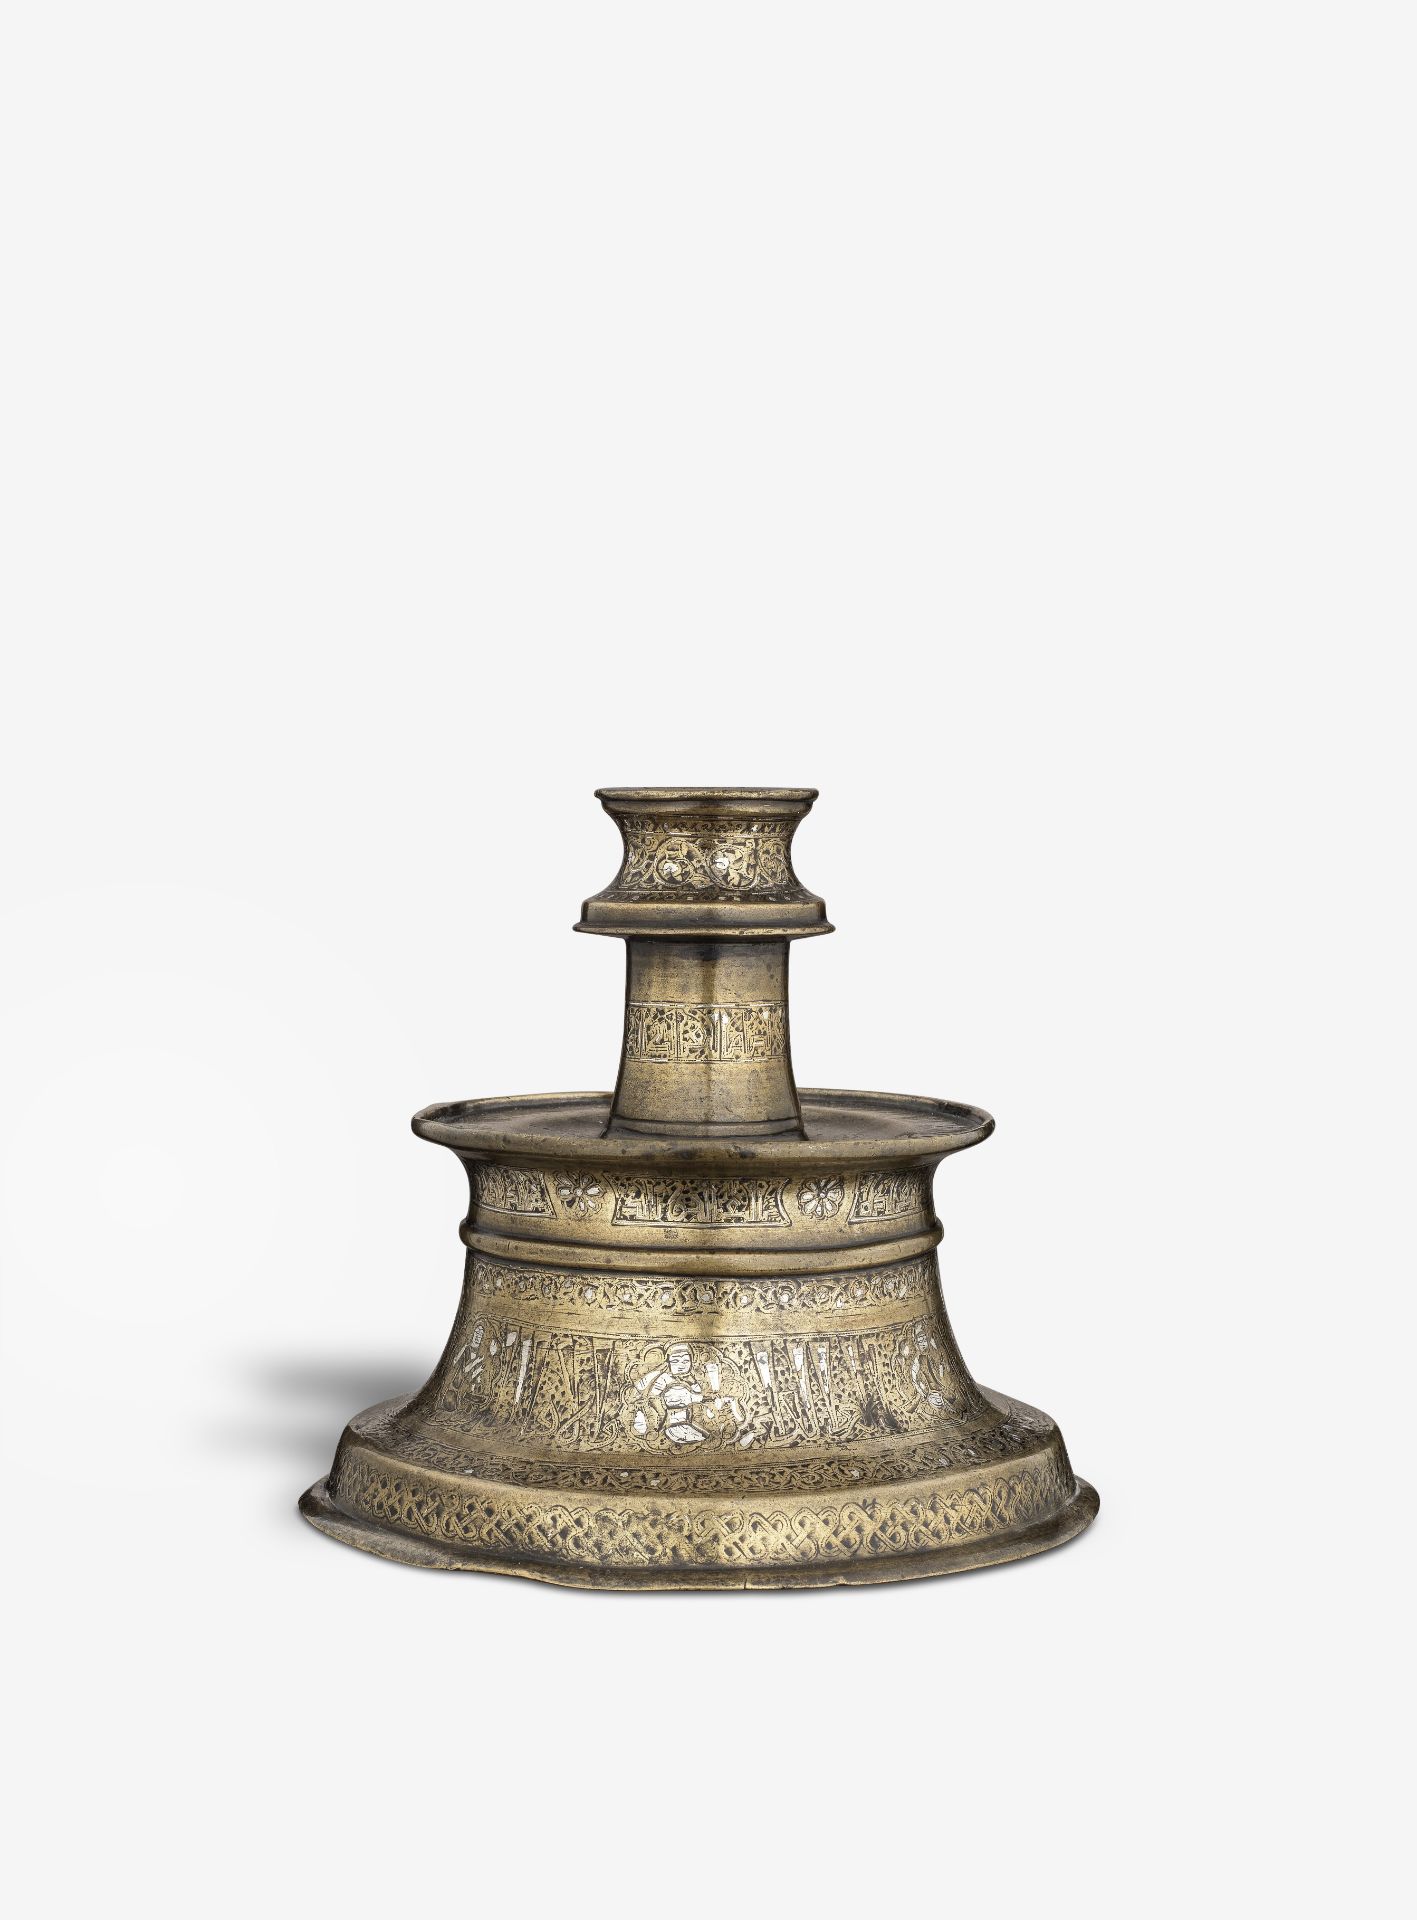 A silver inlaid bronze candlestick Persia, 13th/ 14th Century